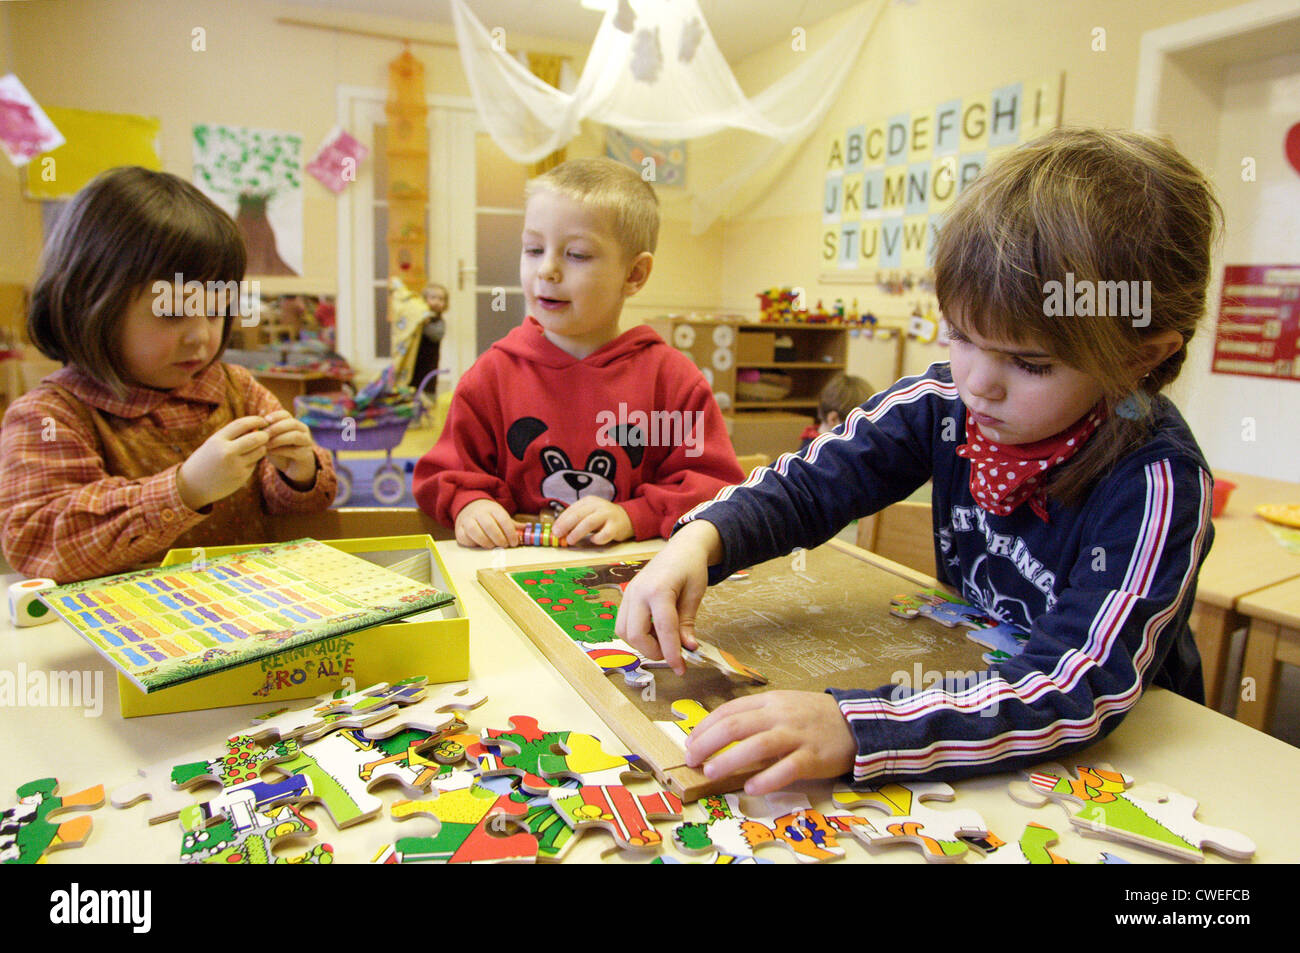 Nursery care in the community center Lilienthal Stock Photo